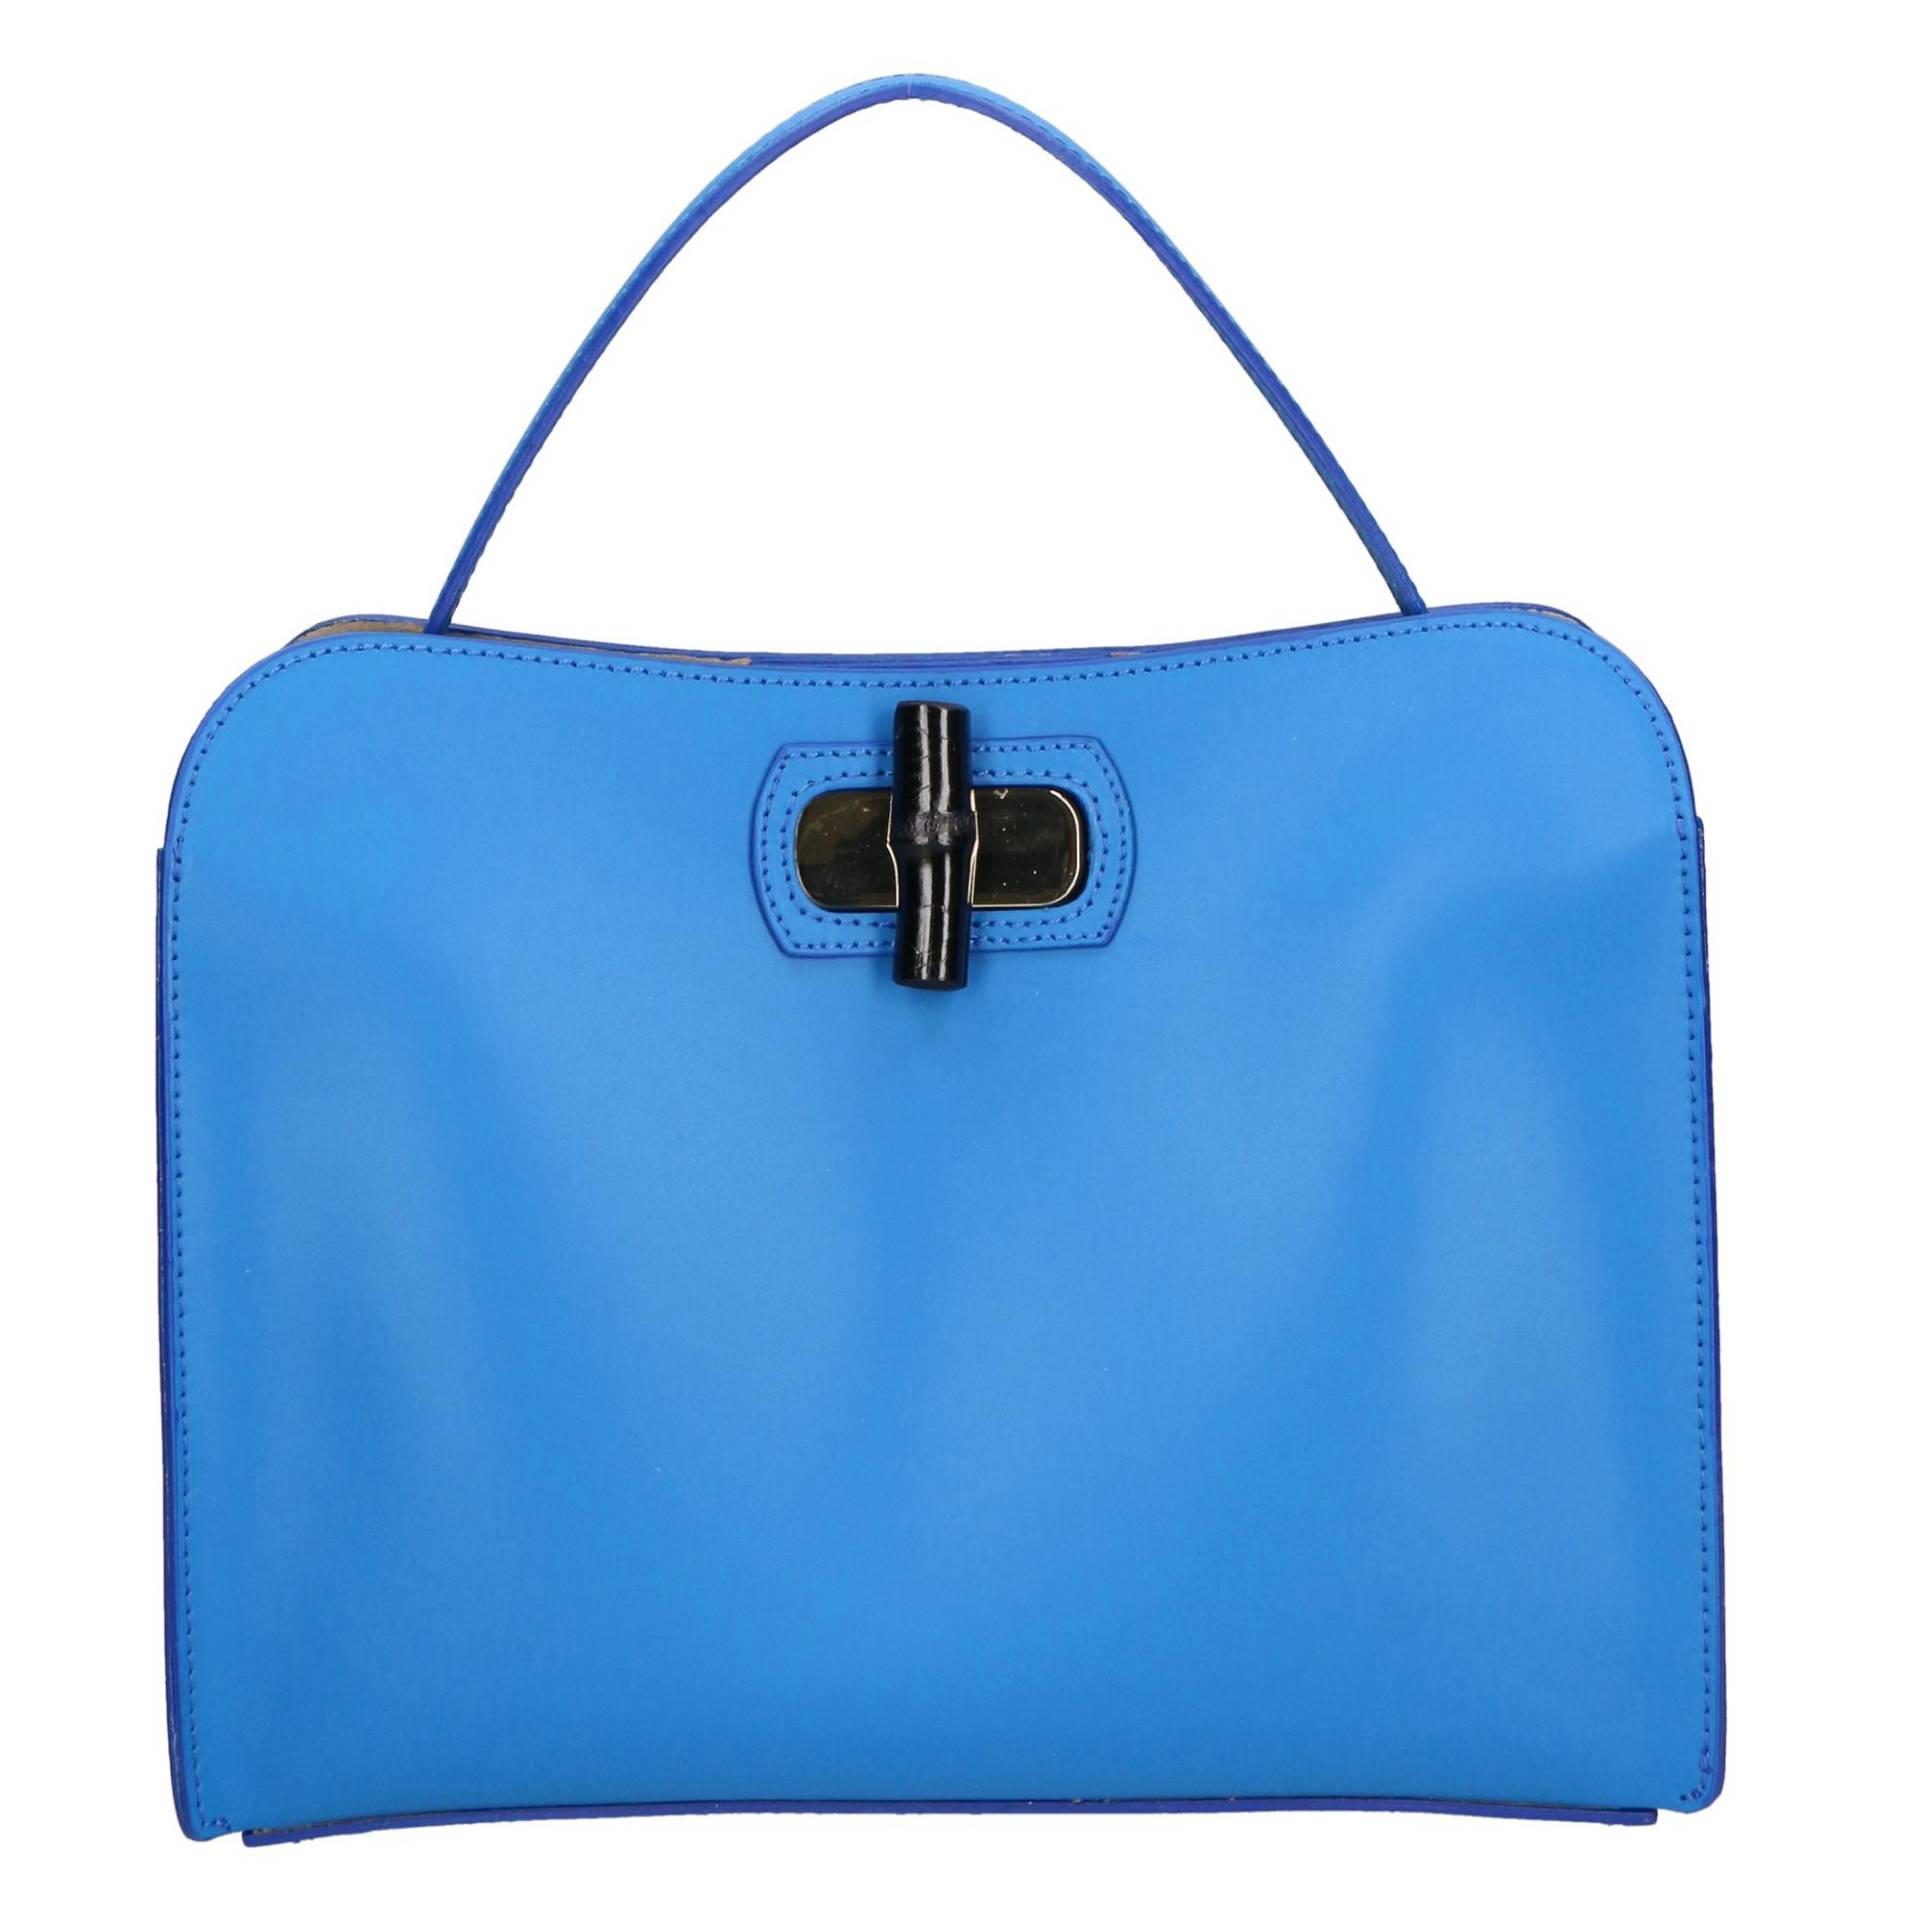 Handtasche Women's Single-compartment Handbag In Wrinkled Leather, With Removable Shoulder Strap. Italian Handcrafted Product. Damen Hellblau ONE SIZE von Gave Lux